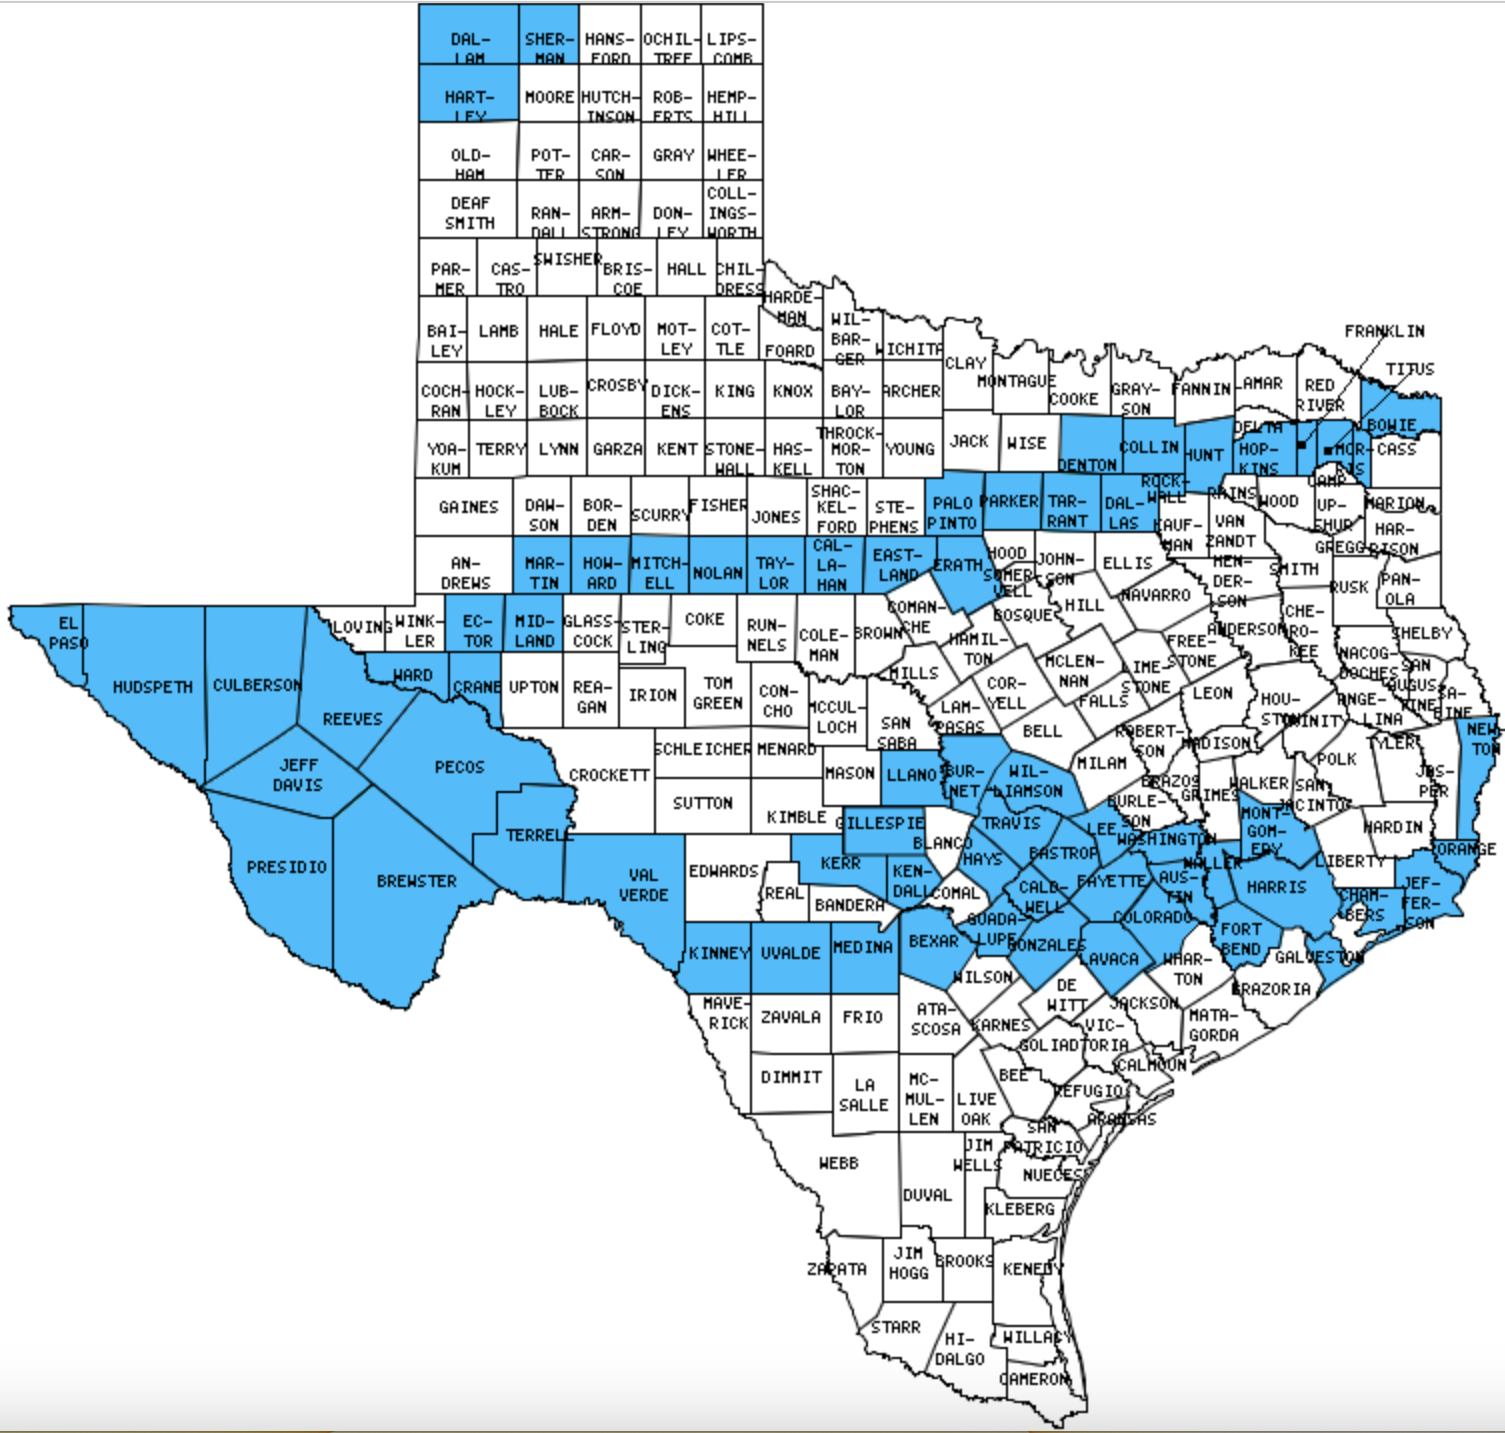 Texas Counties Visited